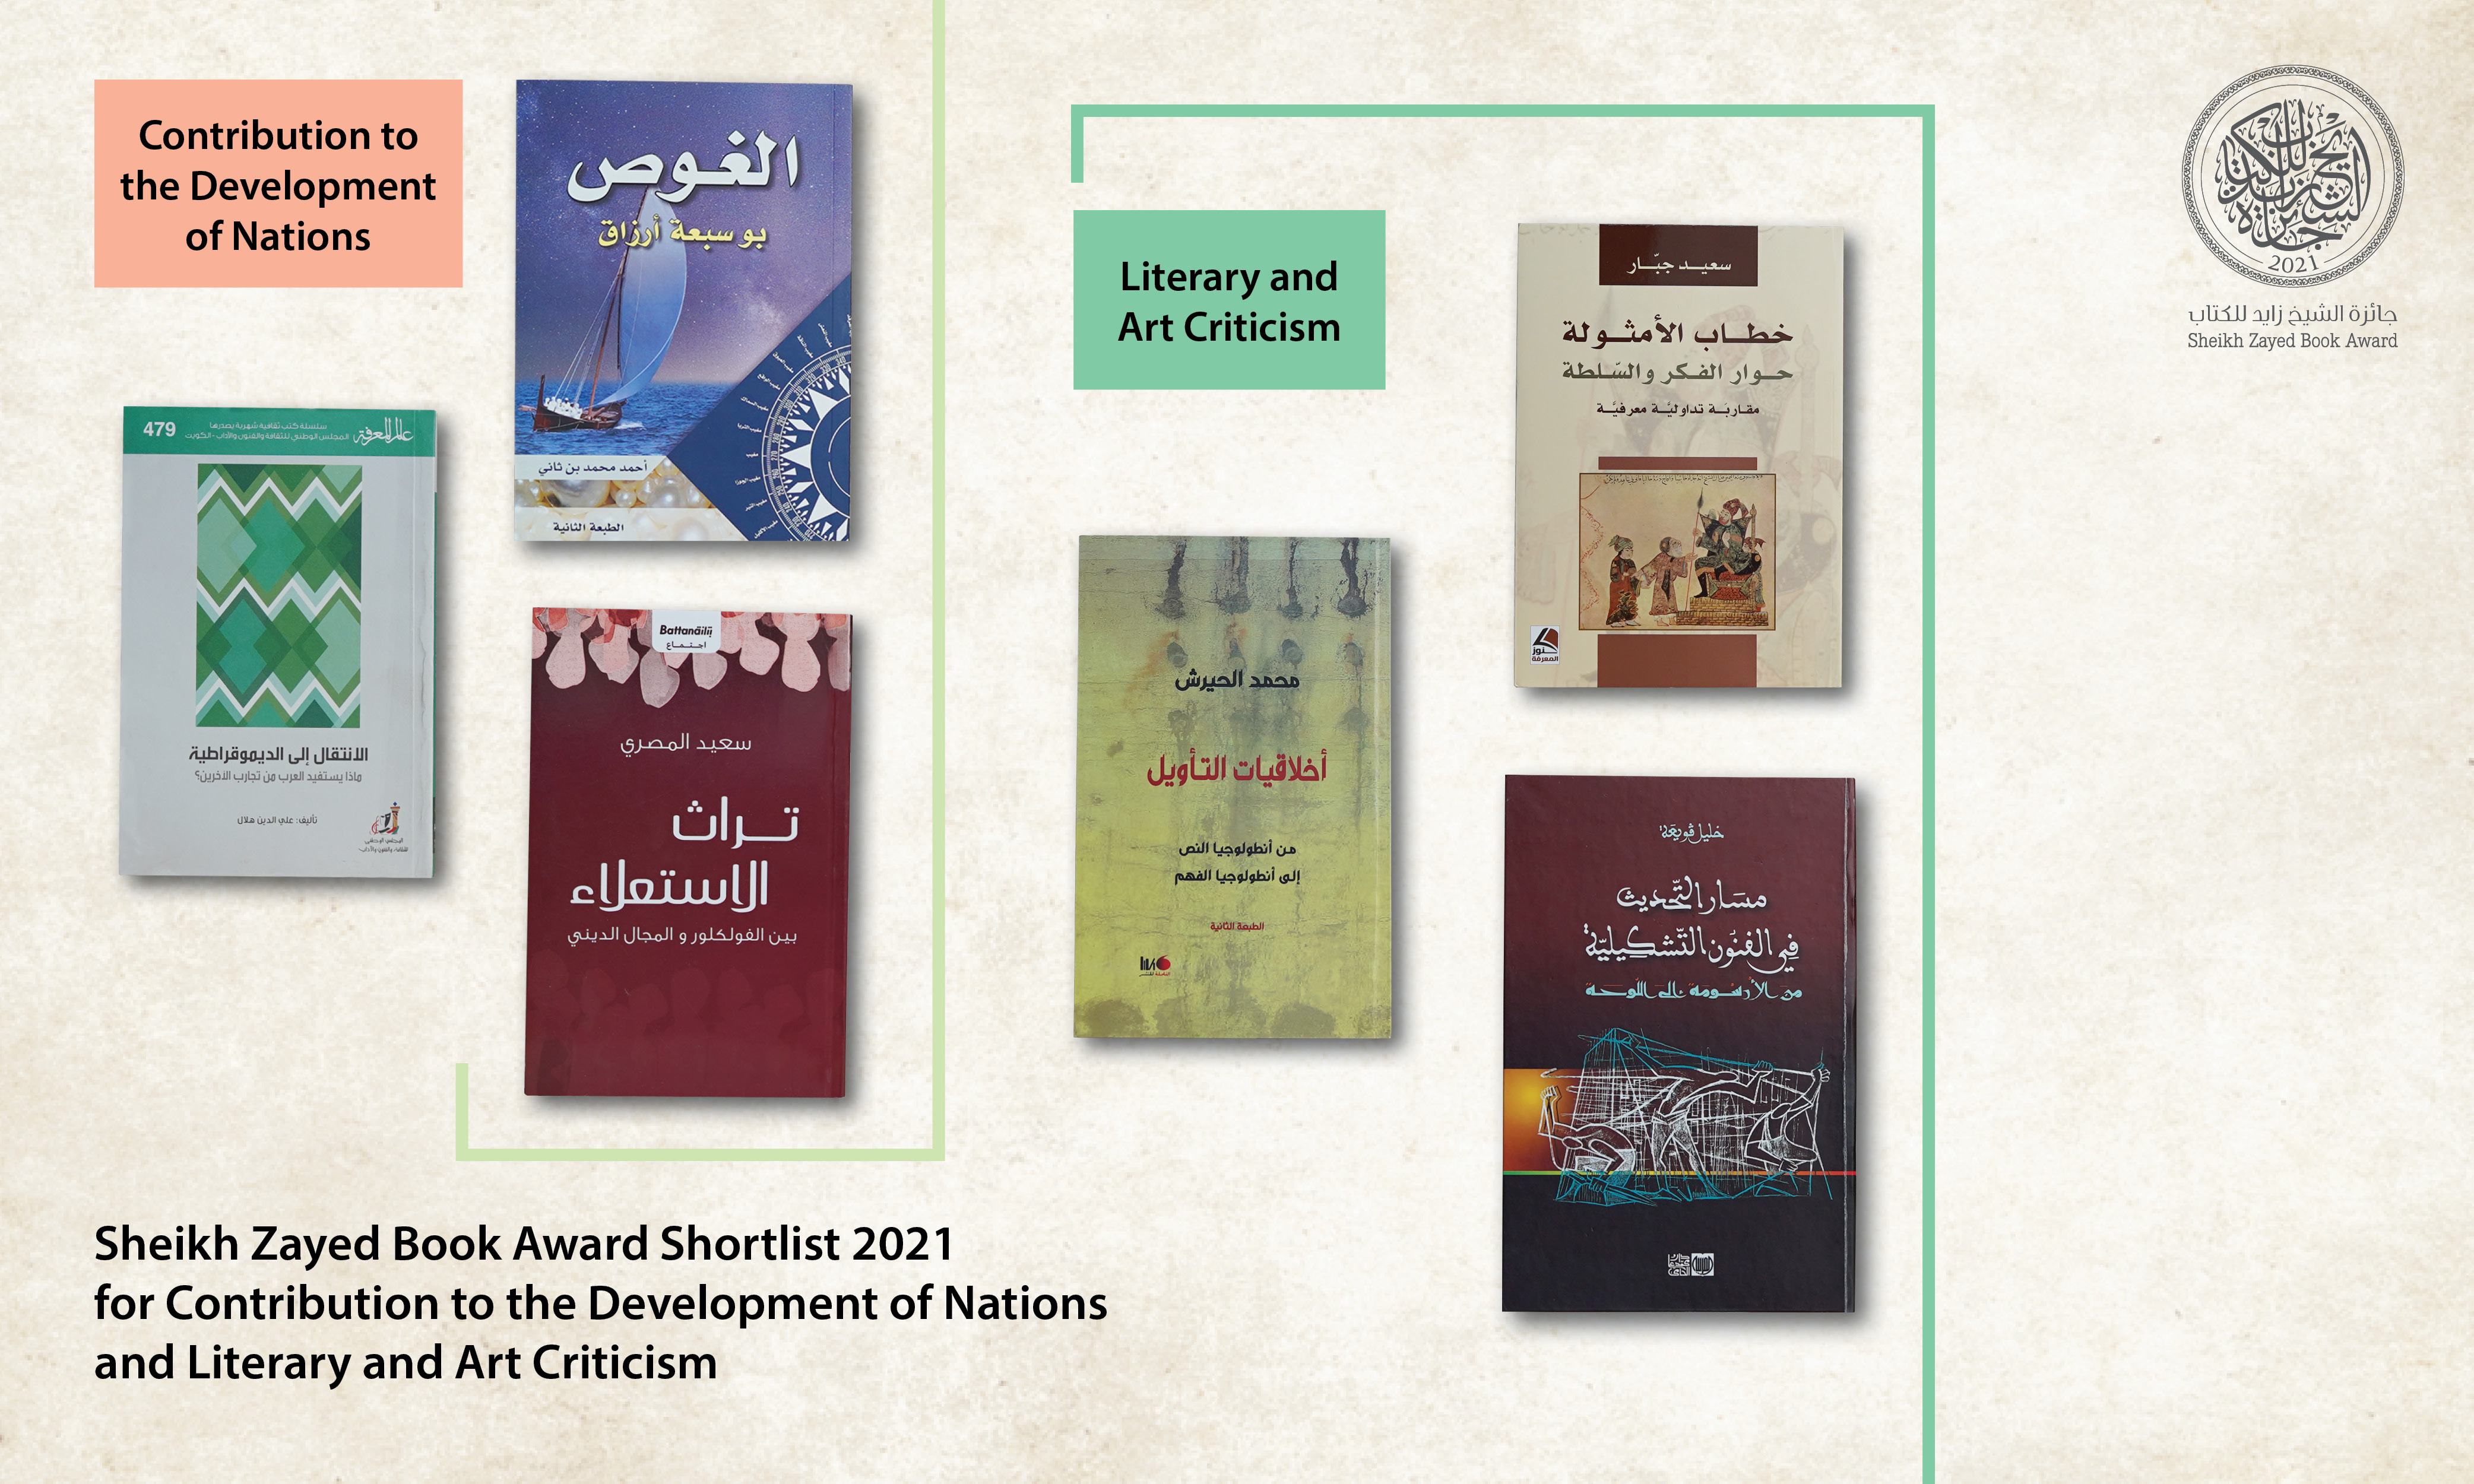 Sheikh Zayed Book Award Reveals 2020/2021 Shortlists For ‘Contribution To The Development Of Nations’ And’ Literary And Art Criticism’ Categories